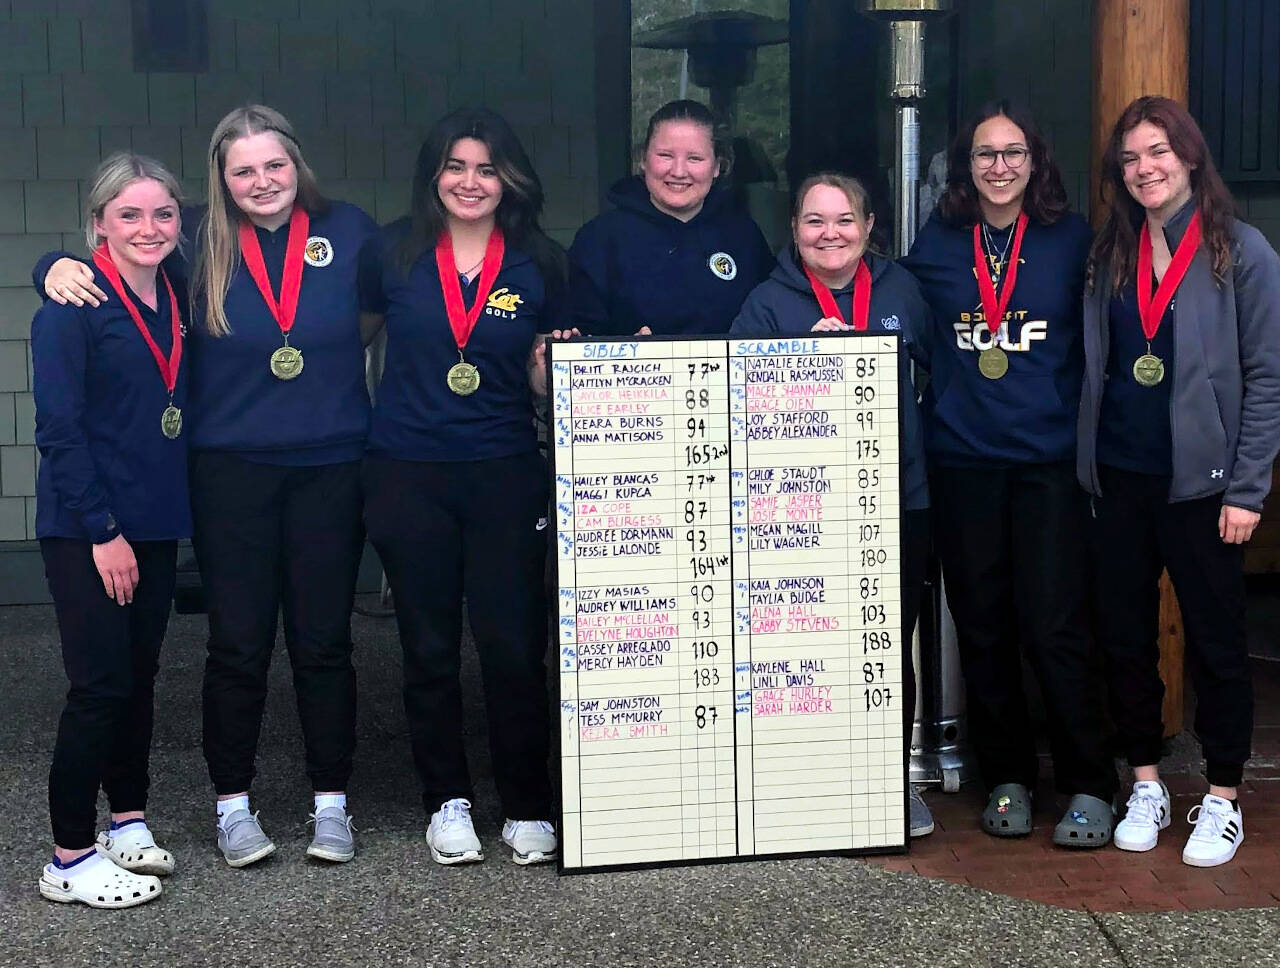 SUBMITTED PHOTO The Aberdeen Bobcats (from left) Britt Rajcich, Kaitlyn McCracken, Saylor Heikkila, Sarah Harder, Alice Earley, Anna Matisons and Keara Burns placed second in the team standings at the Sibley Scramble Tournament at Alderbrook Golf Course in Union on Monday. Rajcich and McCracken tied for first place with a score of 77.